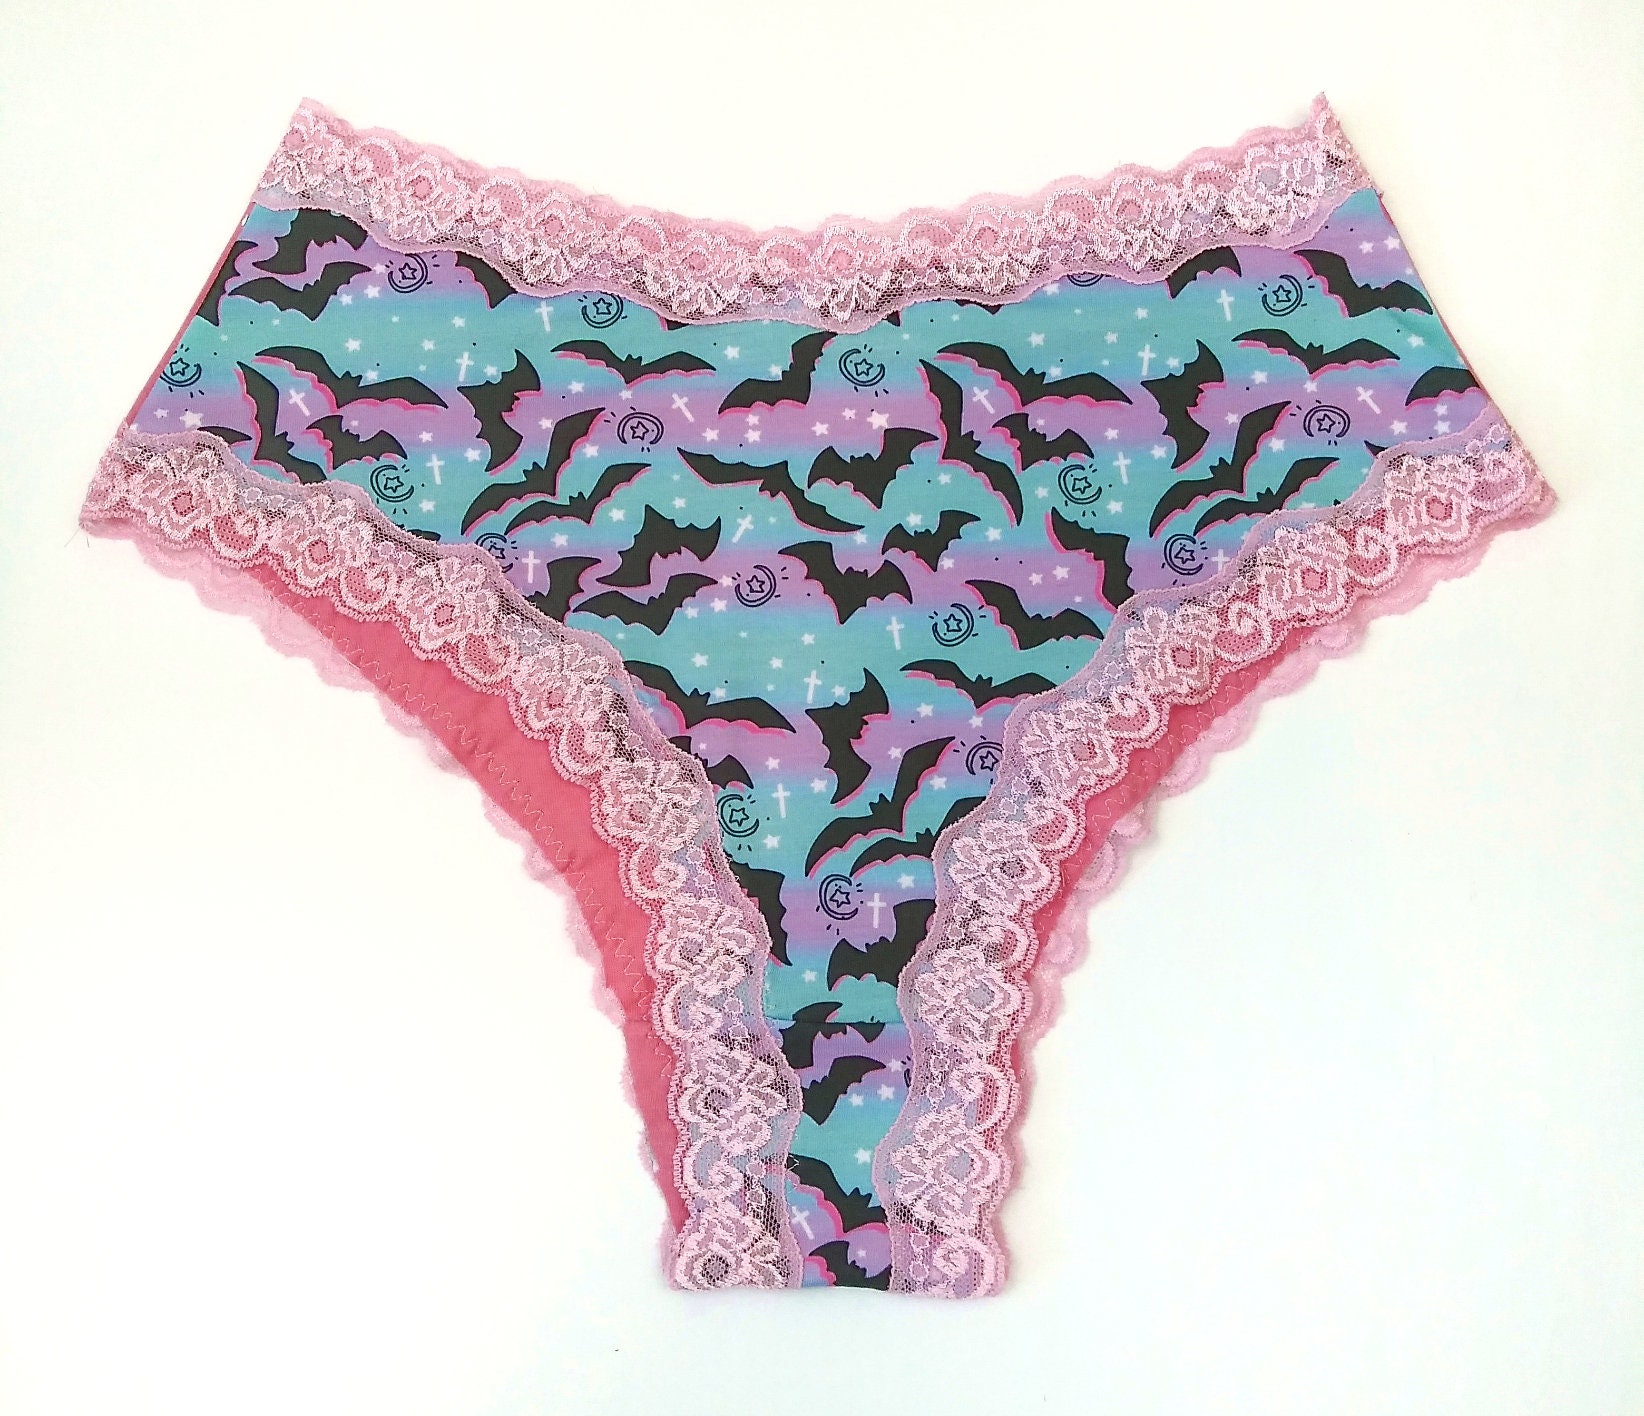 Bat Underwear for Women, Blue and Purple Batty Pastel Goth Panties With  Pink Back, Handmade High Rise, sweetie Pie 